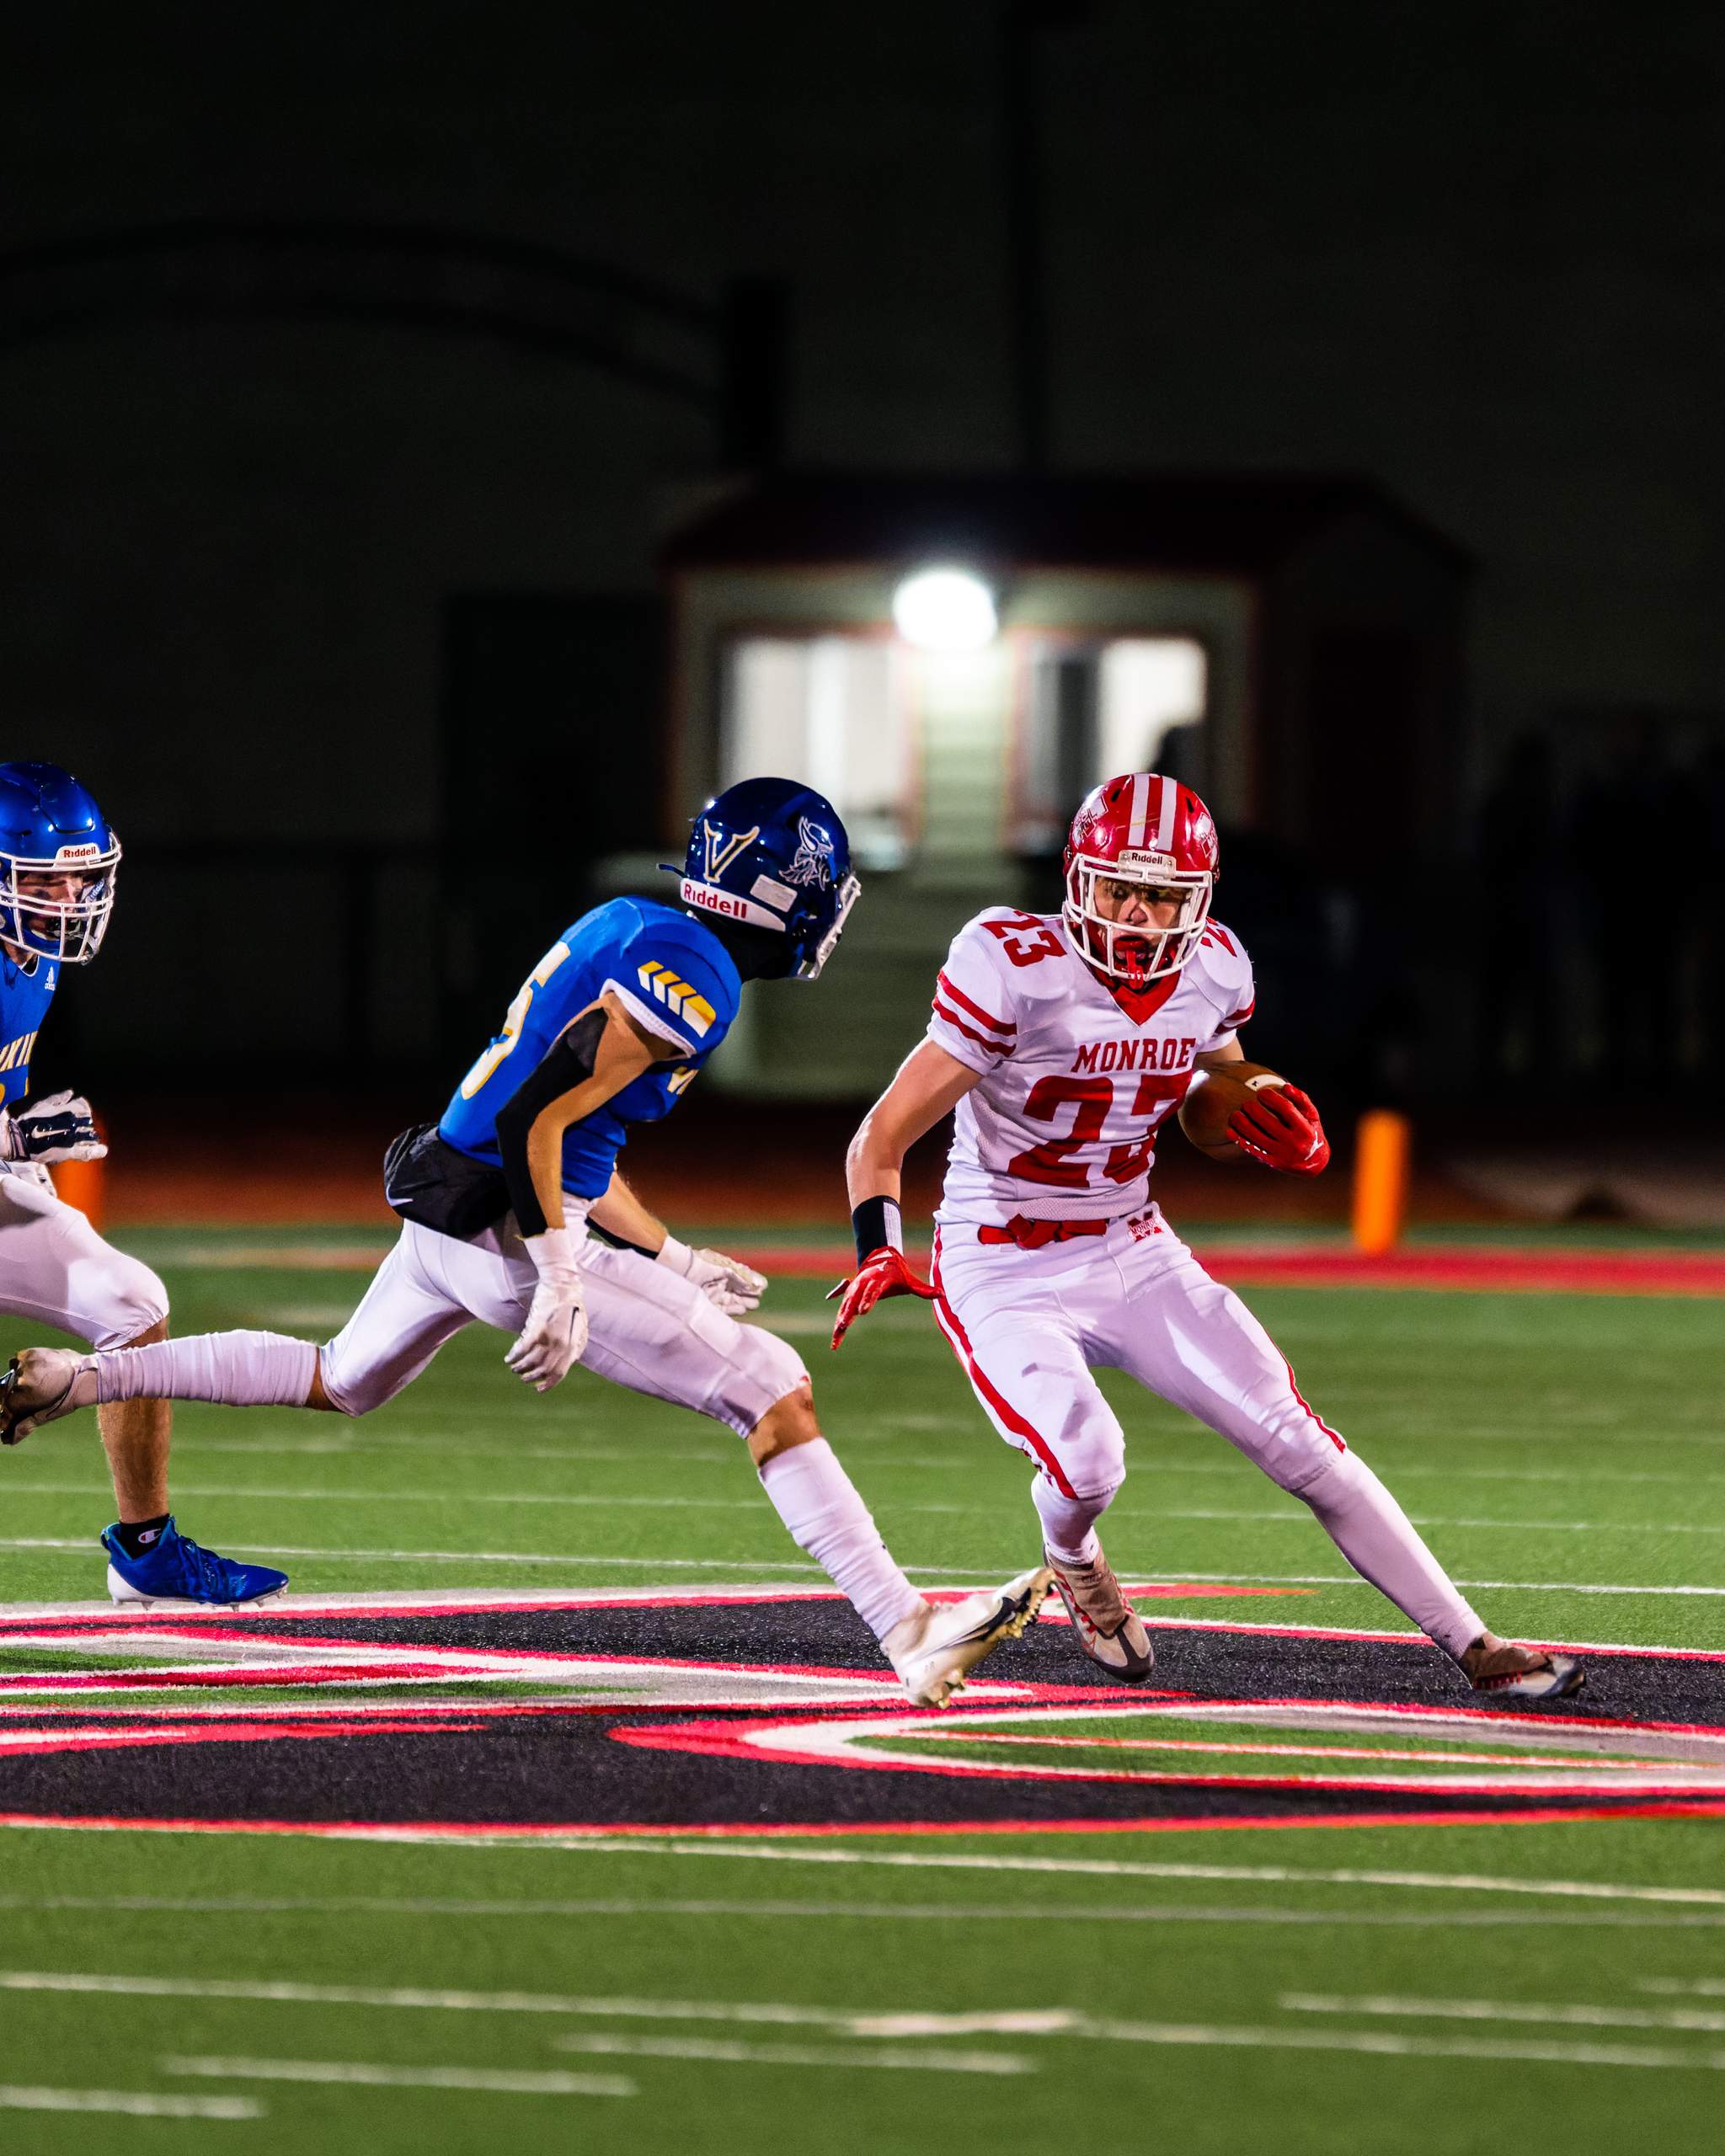 Monroe vs. New Berlin West, Round 4 of the 2022 WIAA Playoffs, photography by Ross Harried for Second Crop Sports